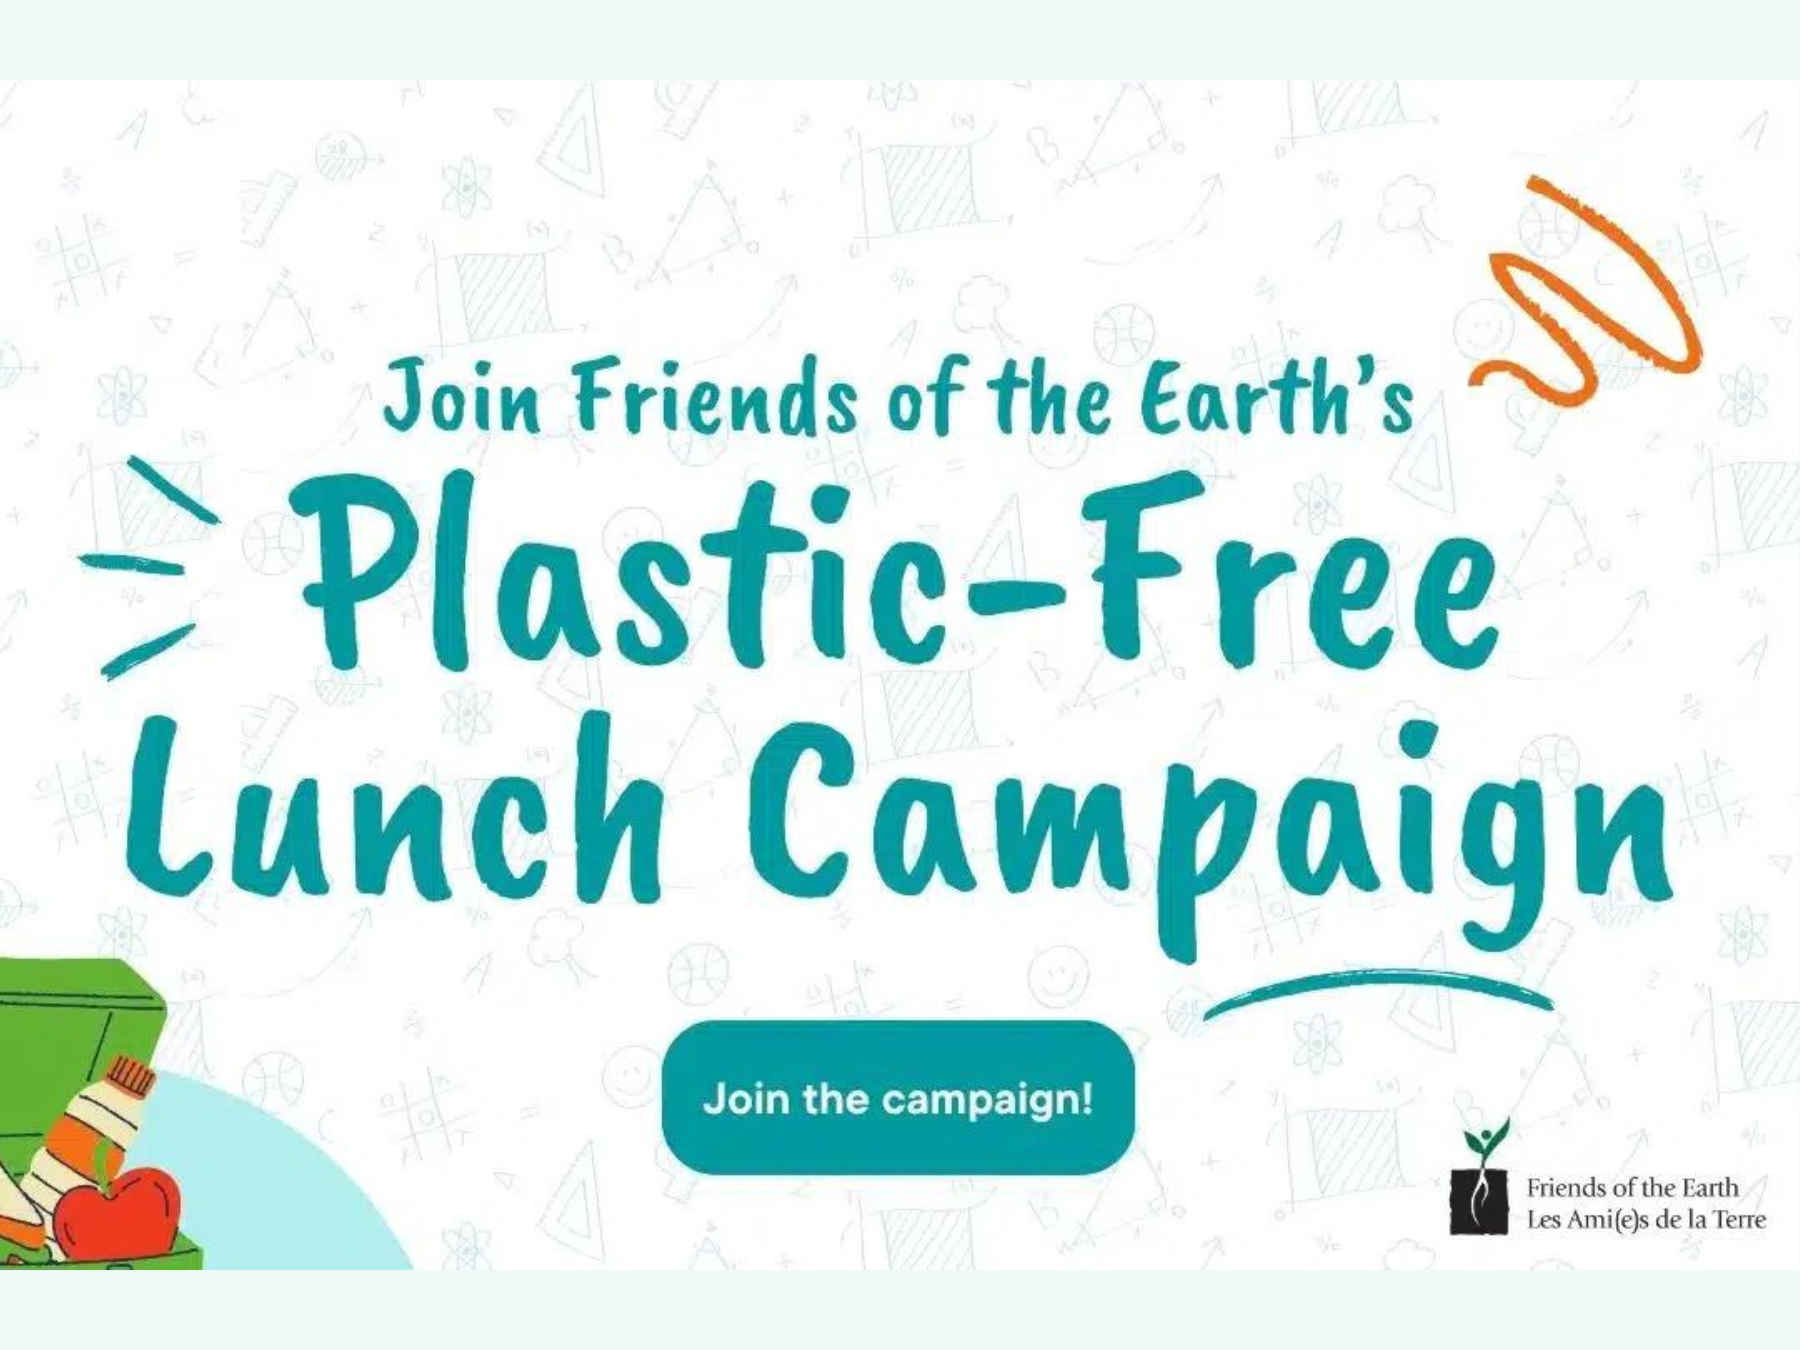 The text on the image reads Join Friends of the Earth's Plastic-Free Lunch Campaign in Blue.